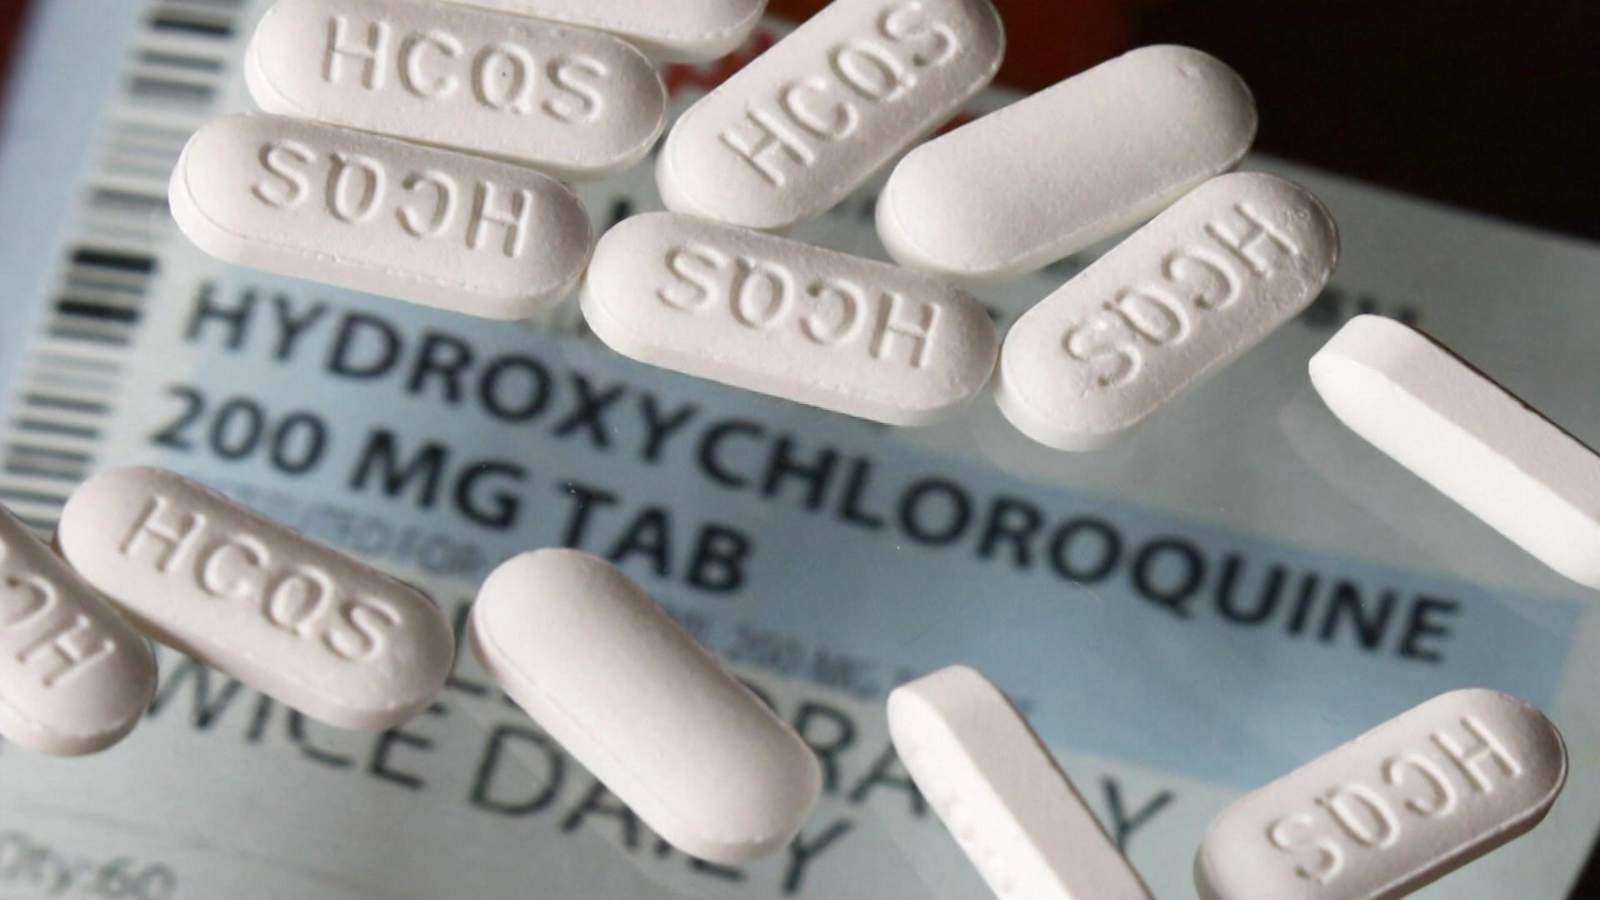 Trust Index: Is Hydroxychloroquine safe for COVID-19 use?